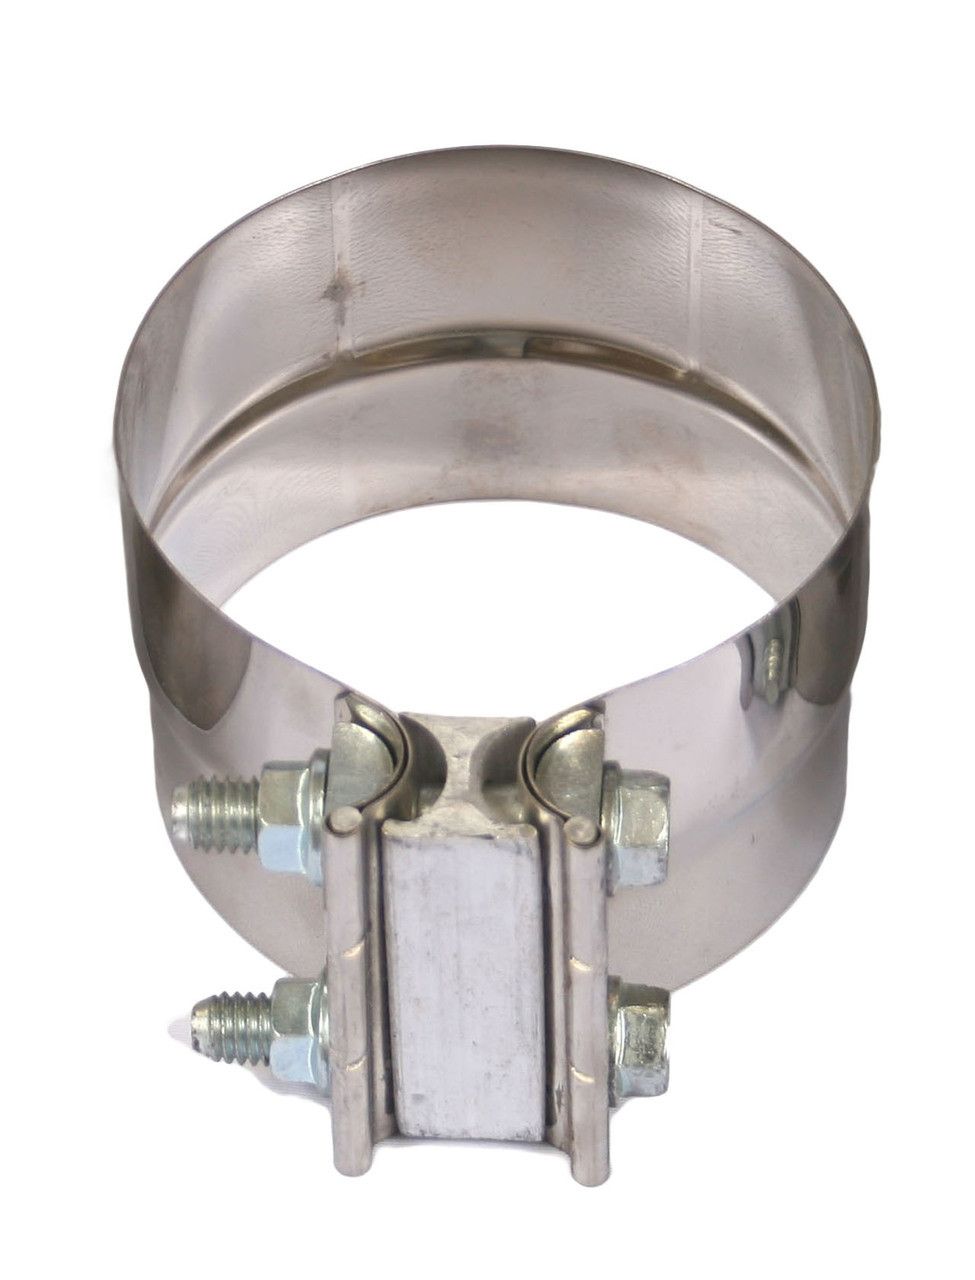 SPIN-SBC35 - STAINLESS BAND CLAMP 3 1/2"